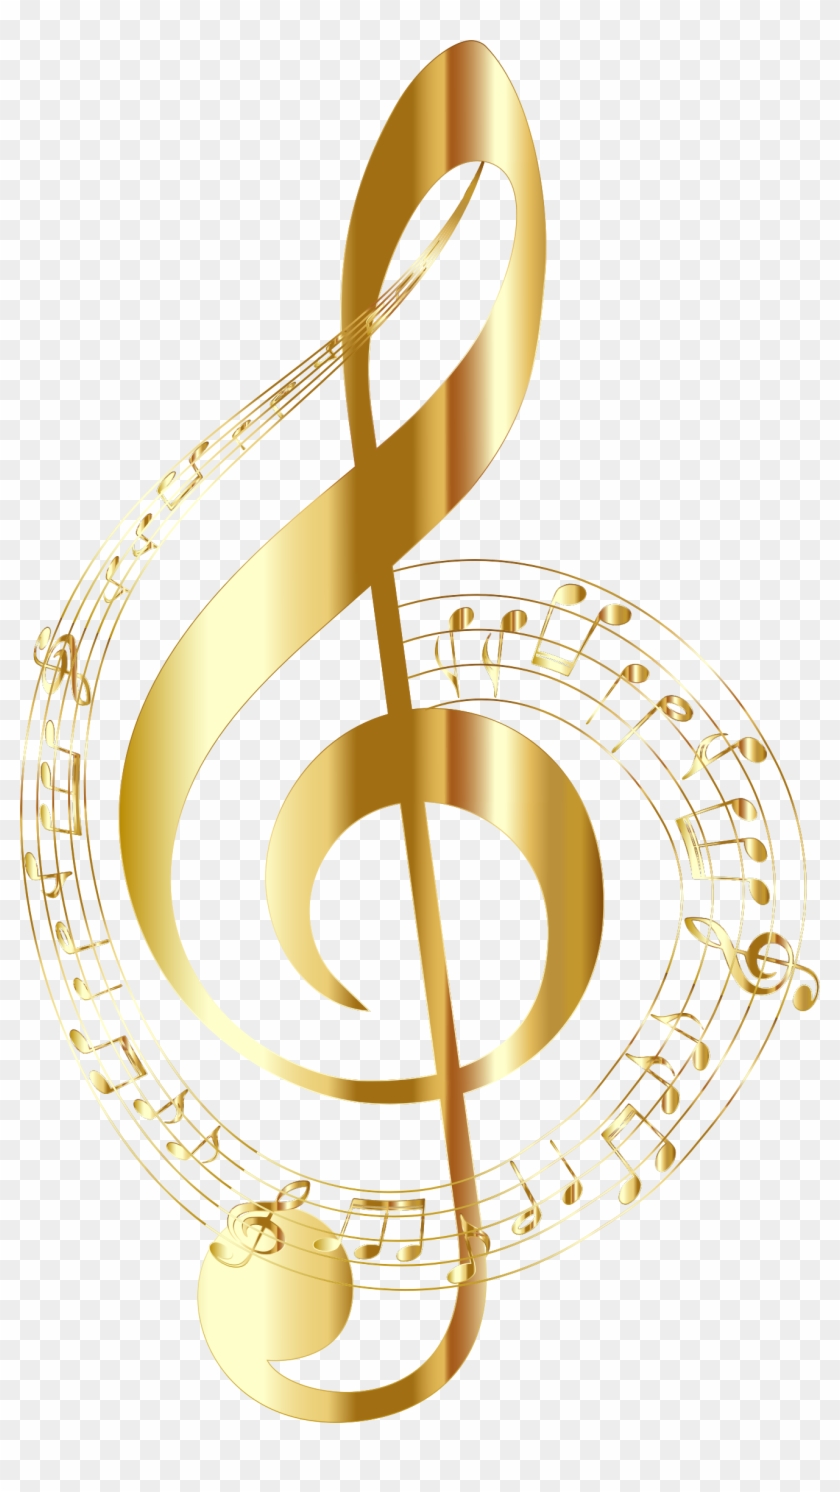 Big Image - Gold Musical Notes Png Clipart #93178